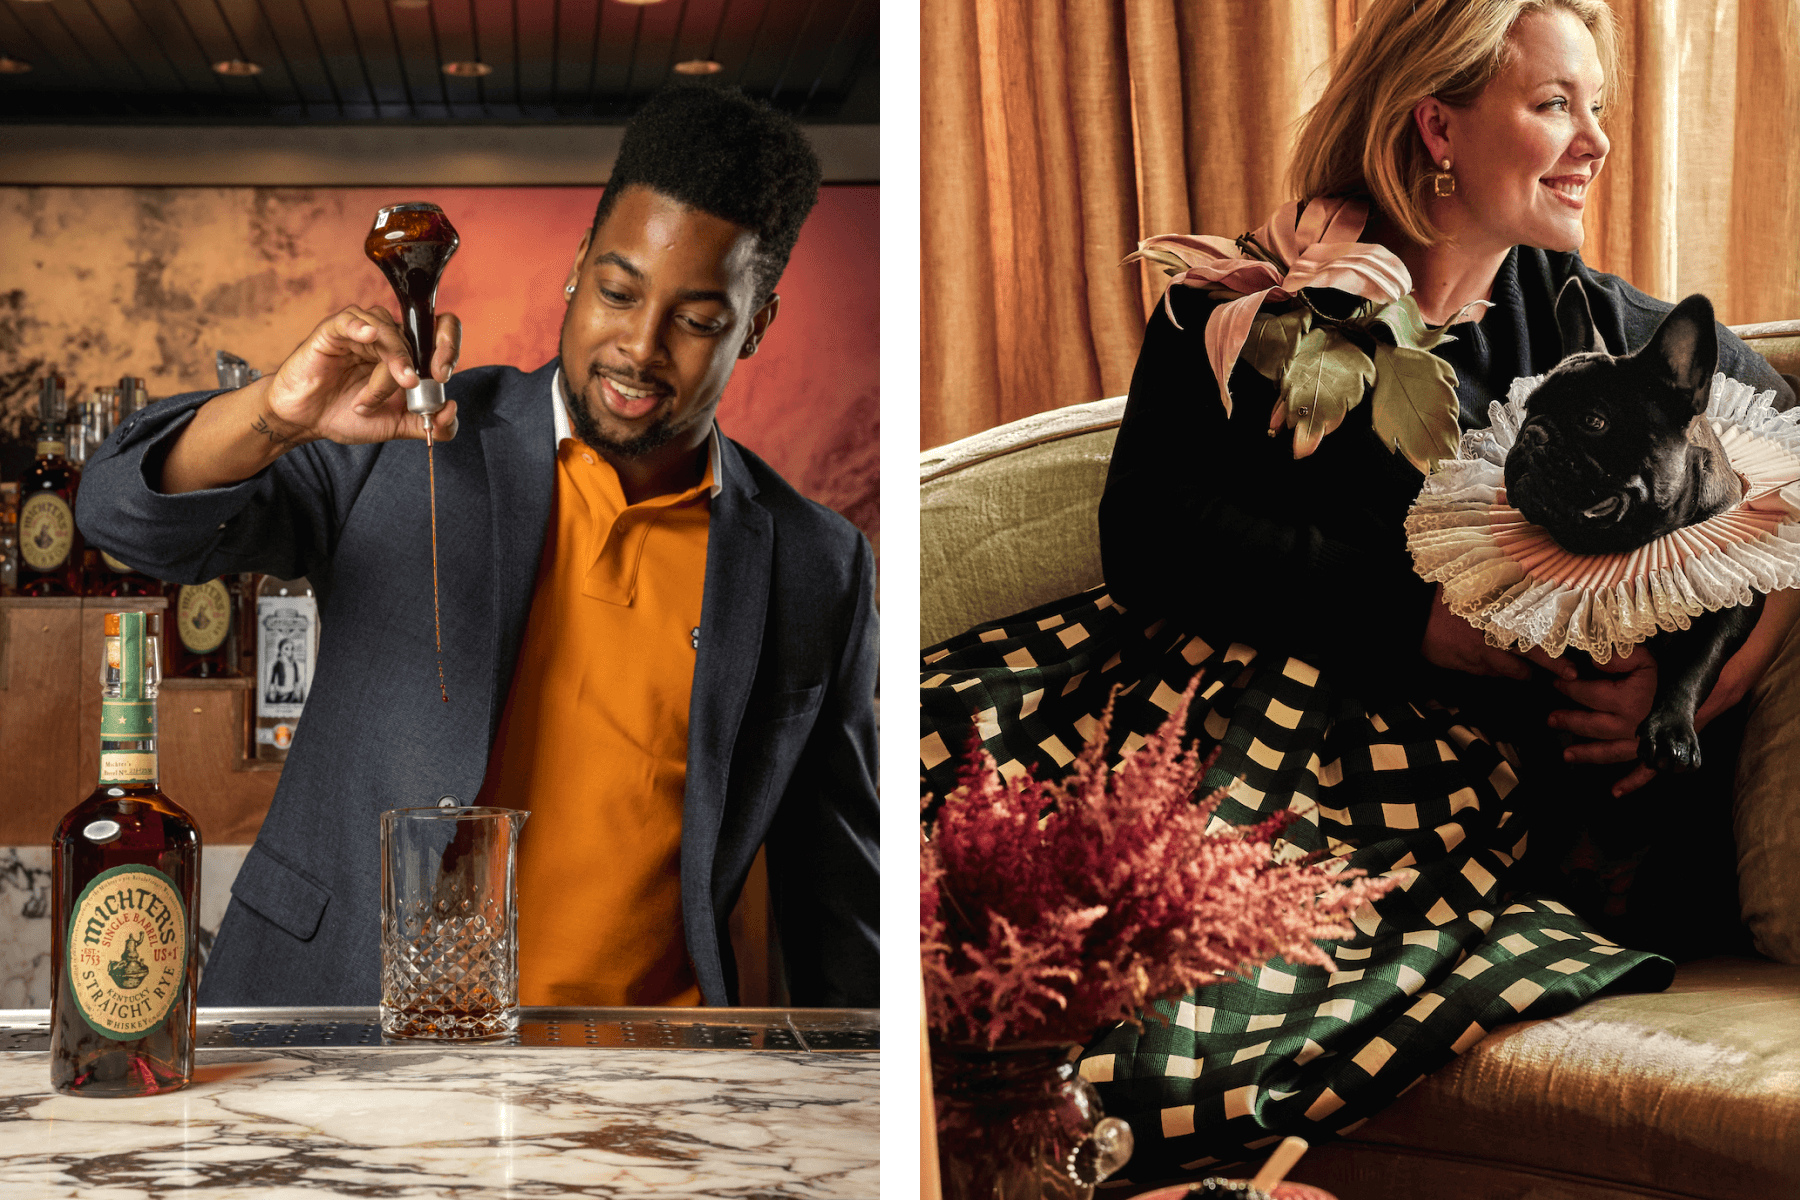 Left: Jarrett Holborough pours bitters into a glass cocktail mixing vessel at a marble counter with a bottle of Rye to his left. Right: Rebecca Gardner sits on a settée with a black French bulldog wearing an Elizabethan lace collar.